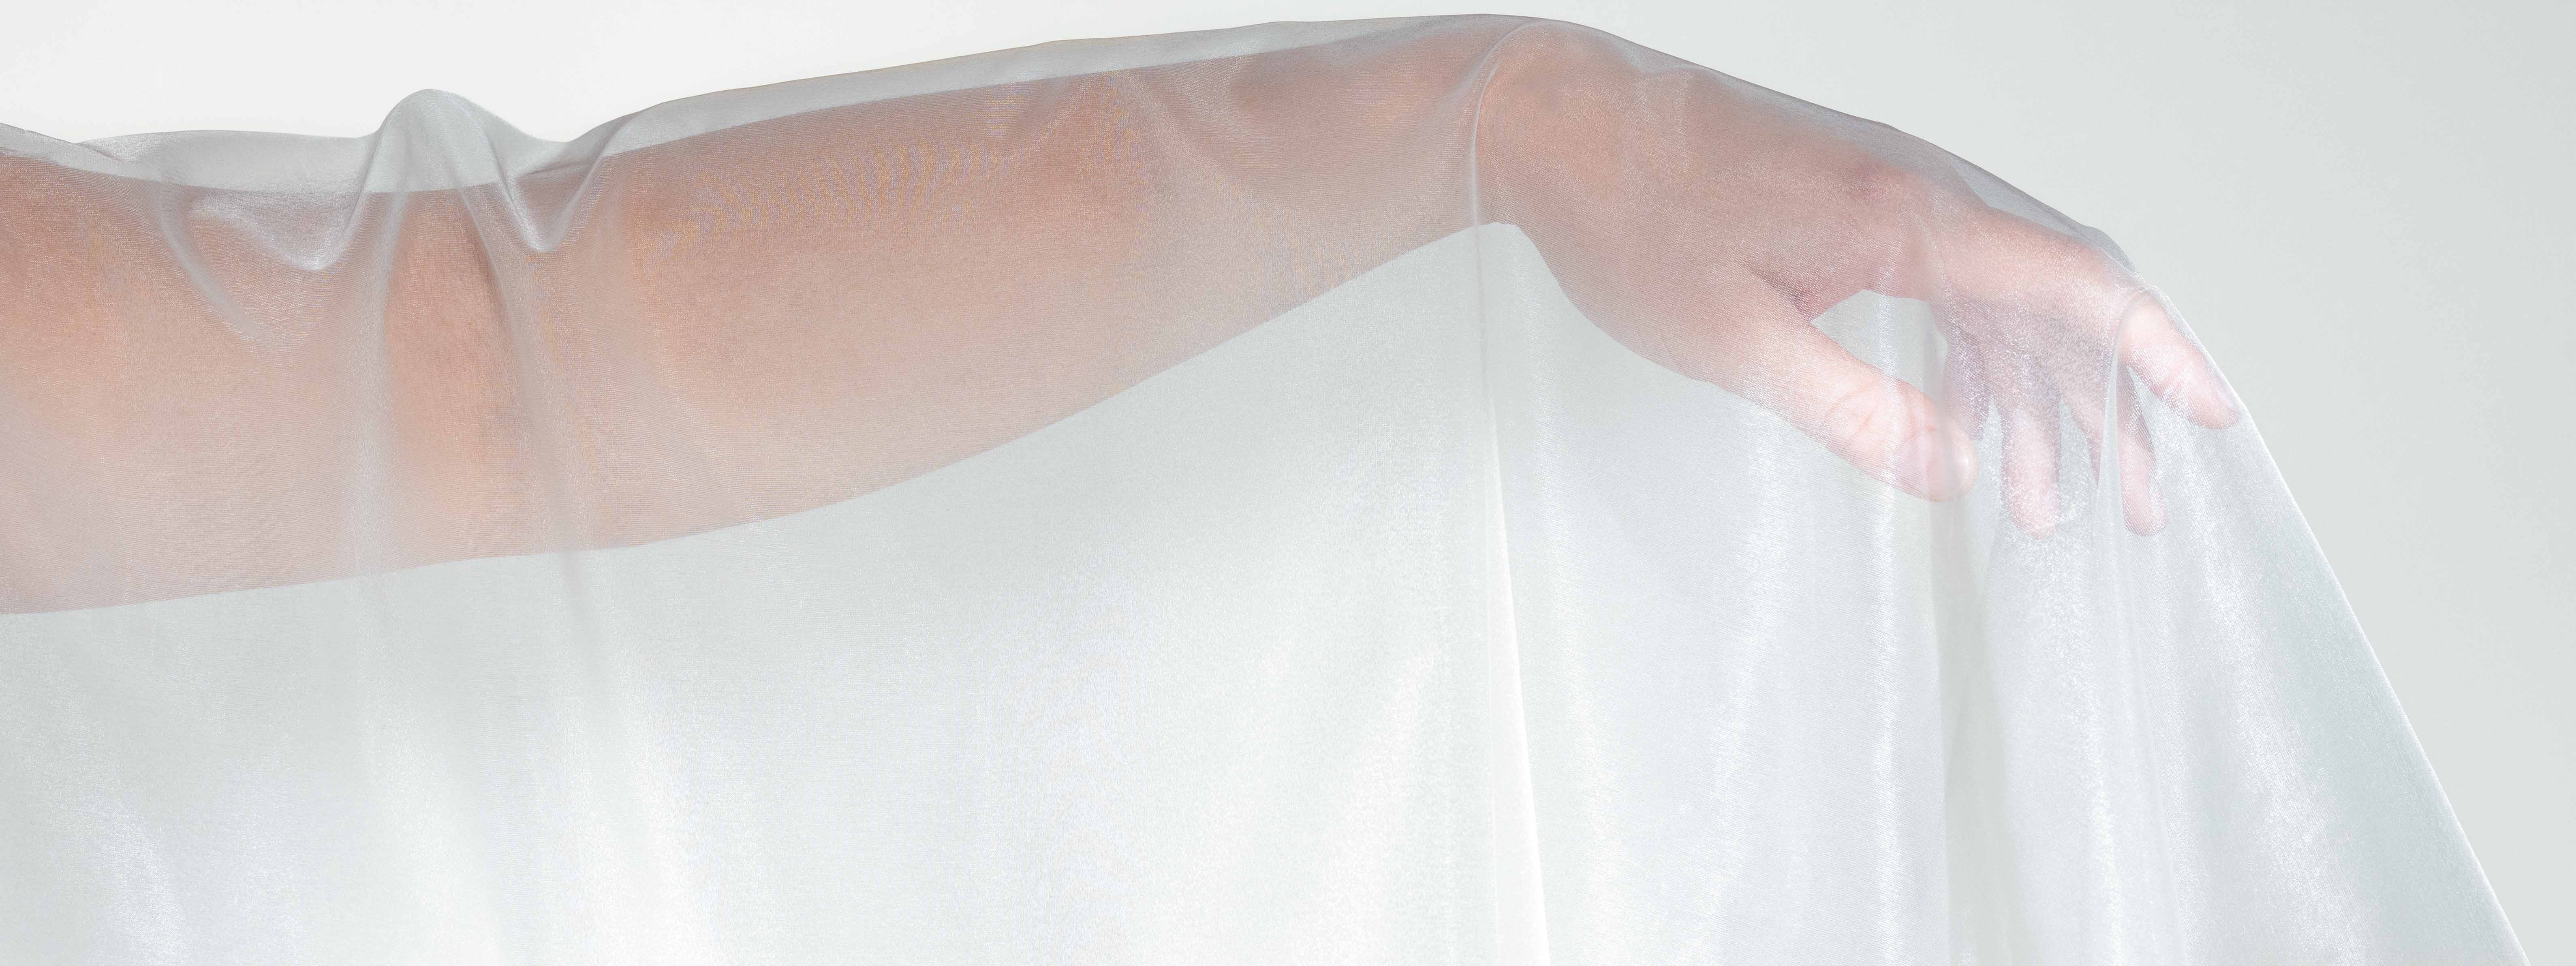 StageVoile CS: highly transparent sheer fabric with a decorative pearly  shine